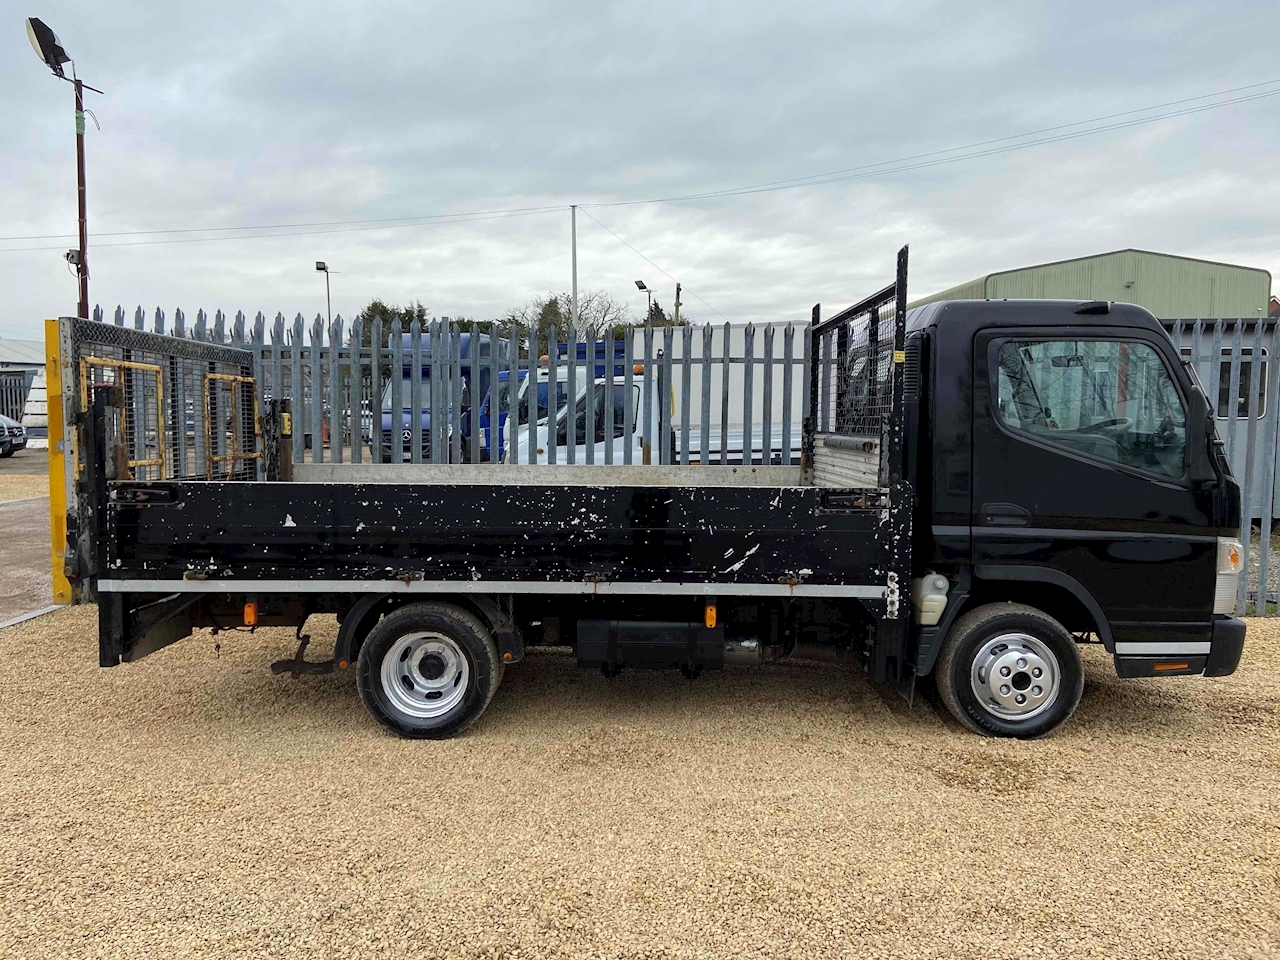 Canter 3C13 Chassis Cab 3.0 Manual Diesel